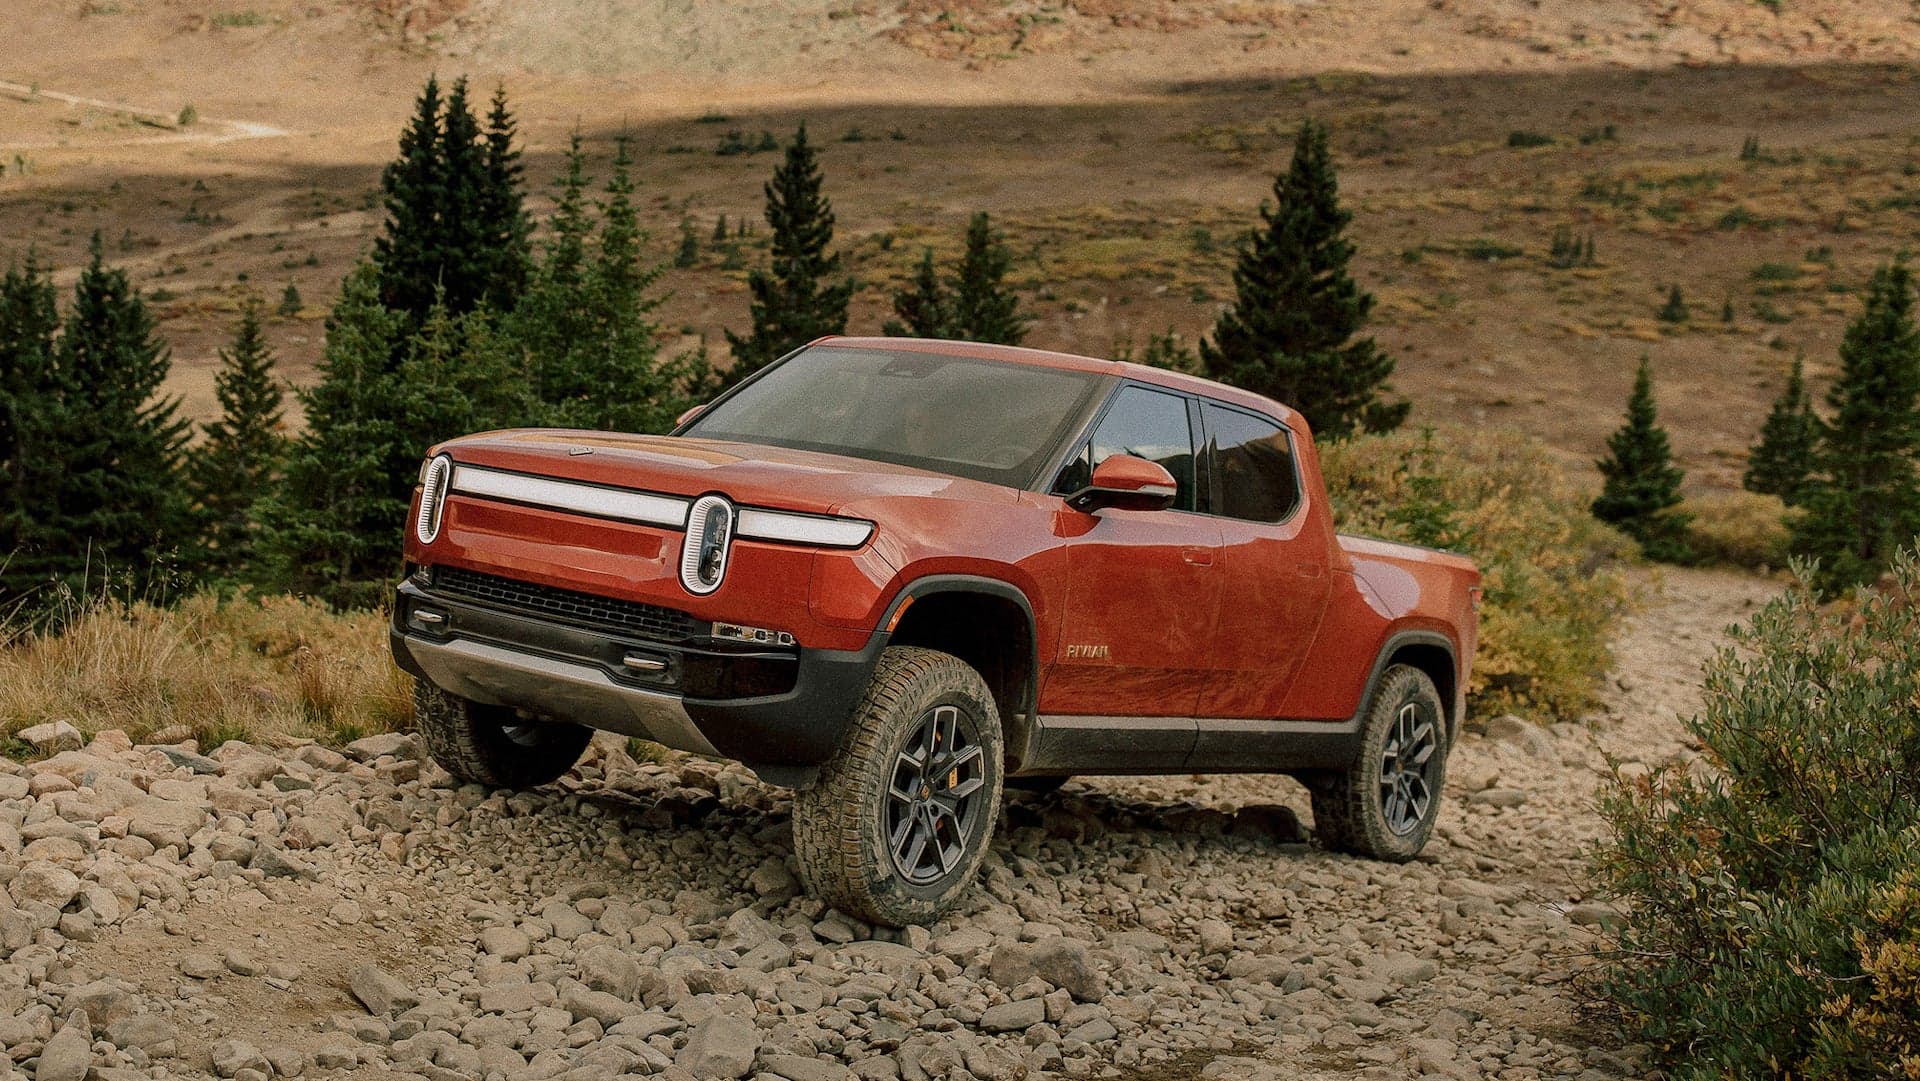 Ford Says It Made $8.2 Billion on Rivian Investment in Q4 2021